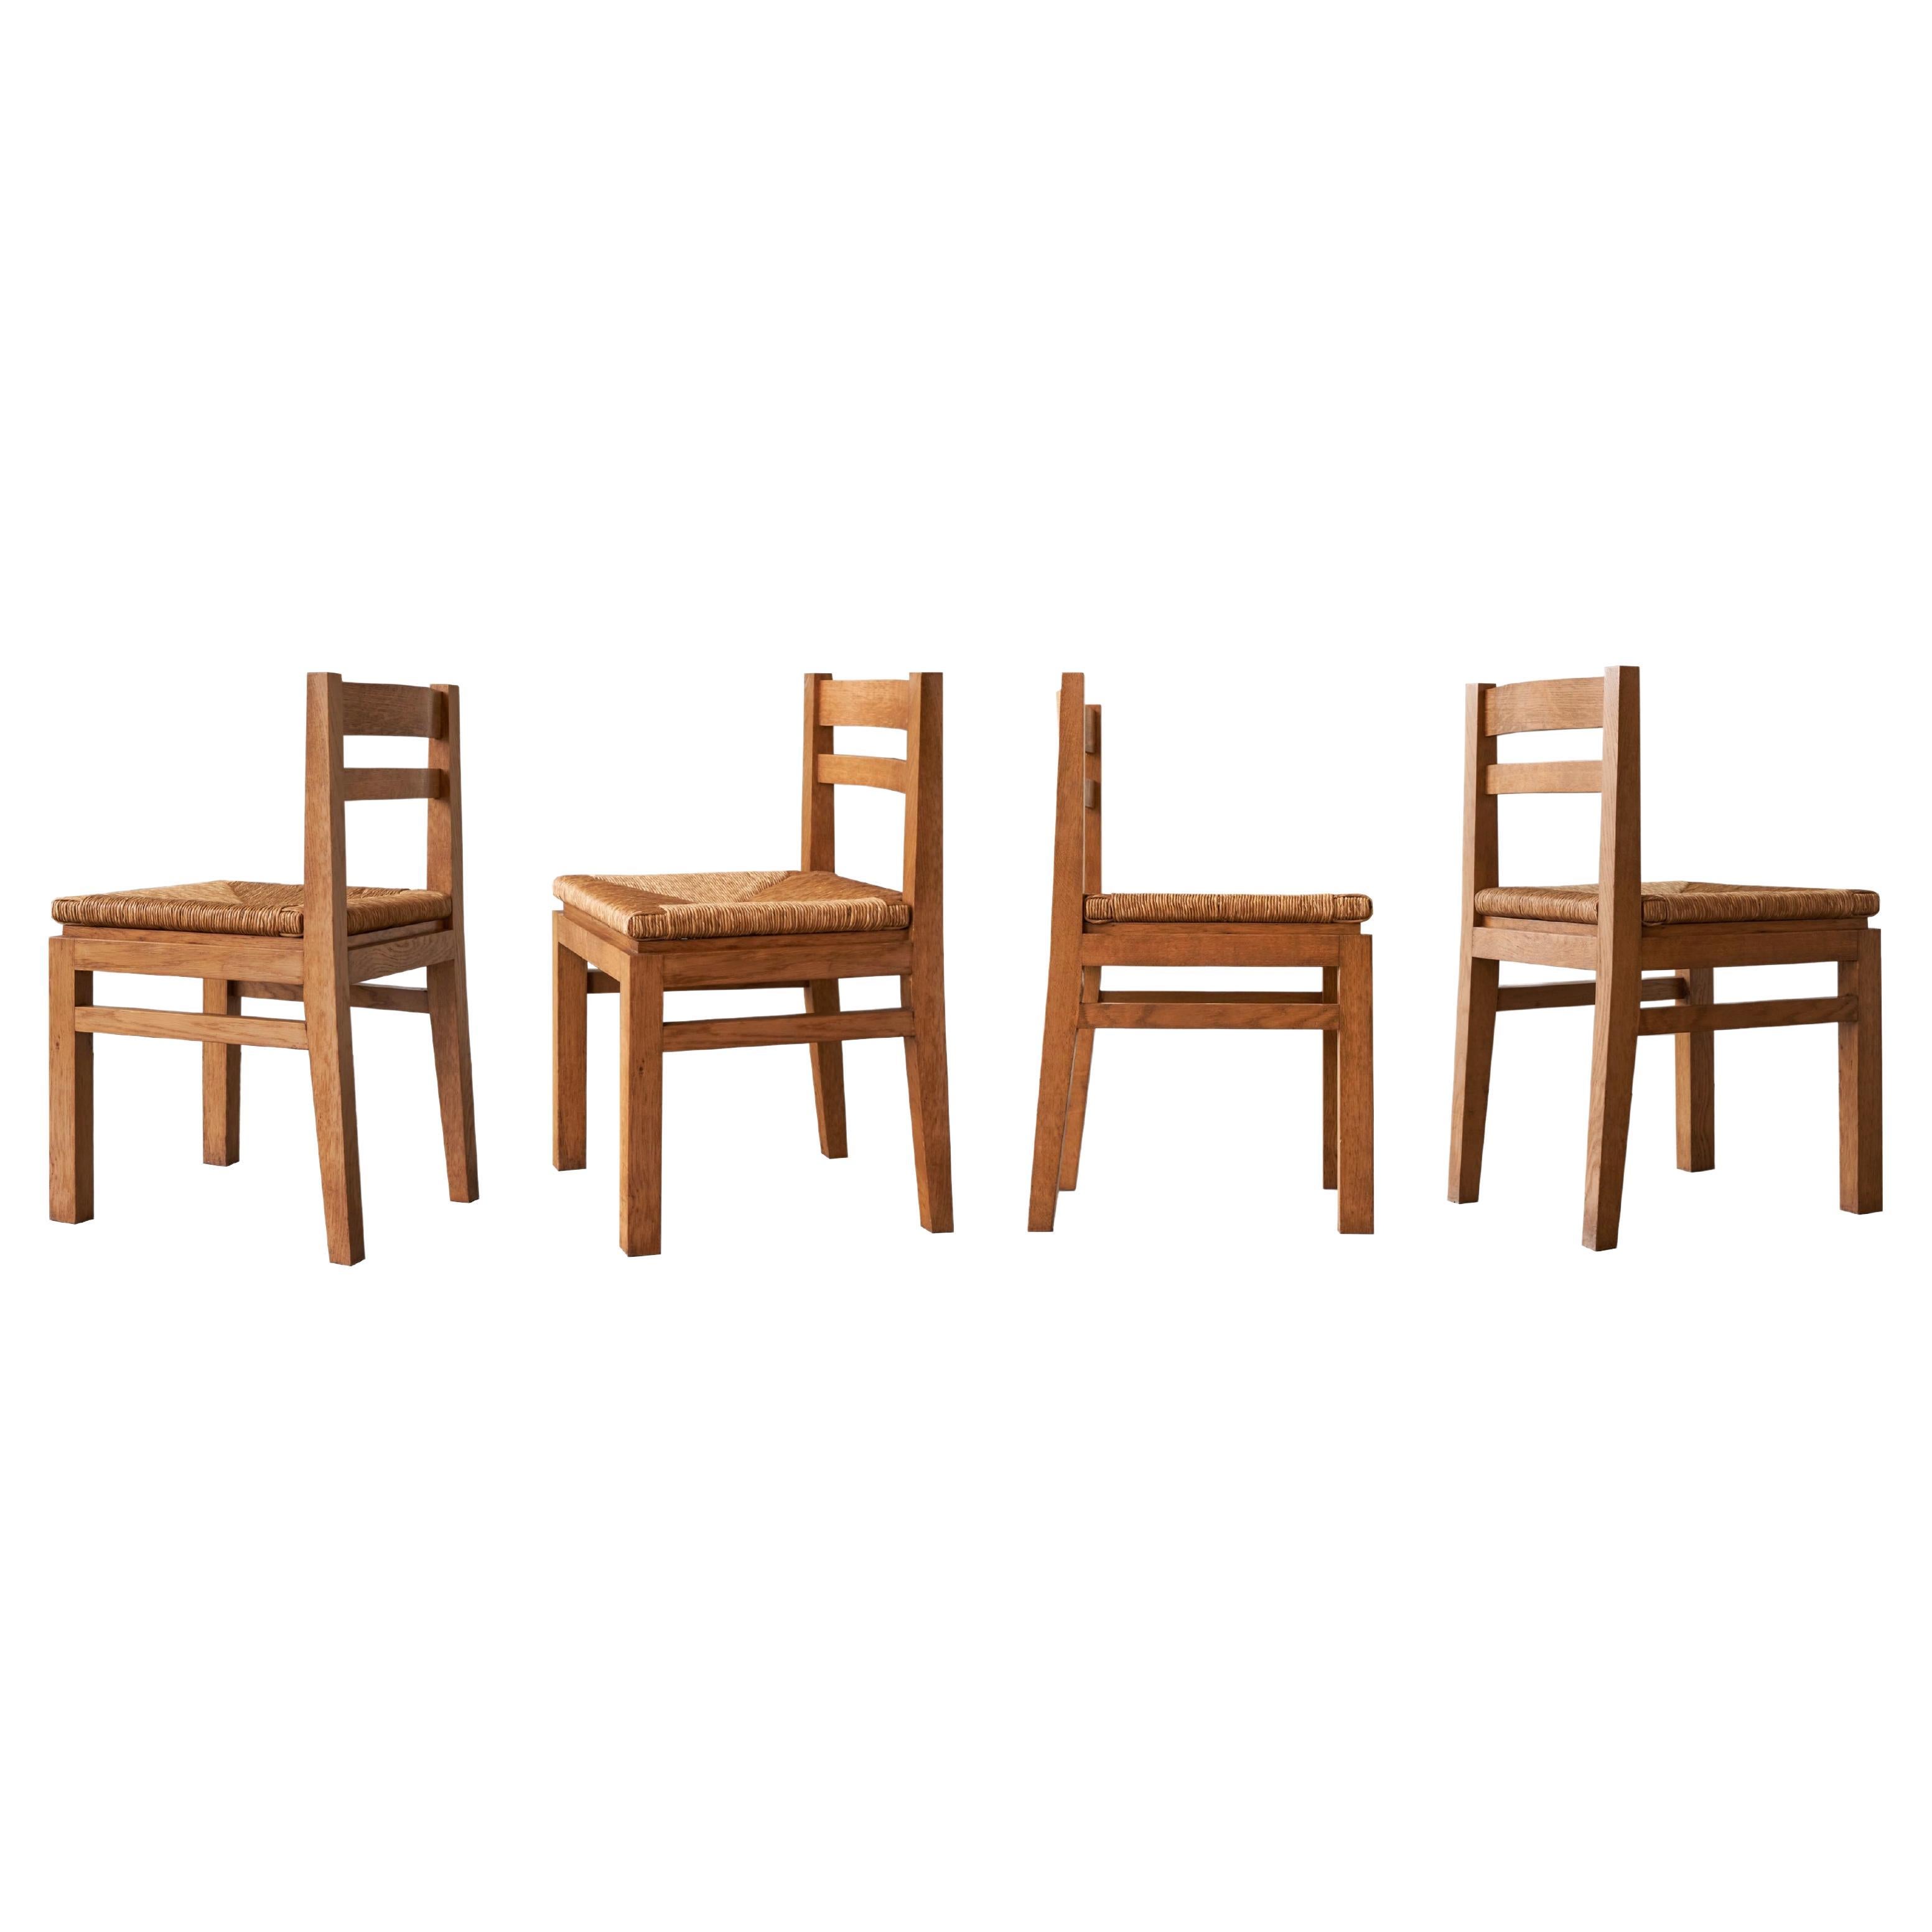 Set of 4 Belgian Mid Century Modernist Dining Chairs in Oak and Straw 1960s For Sale